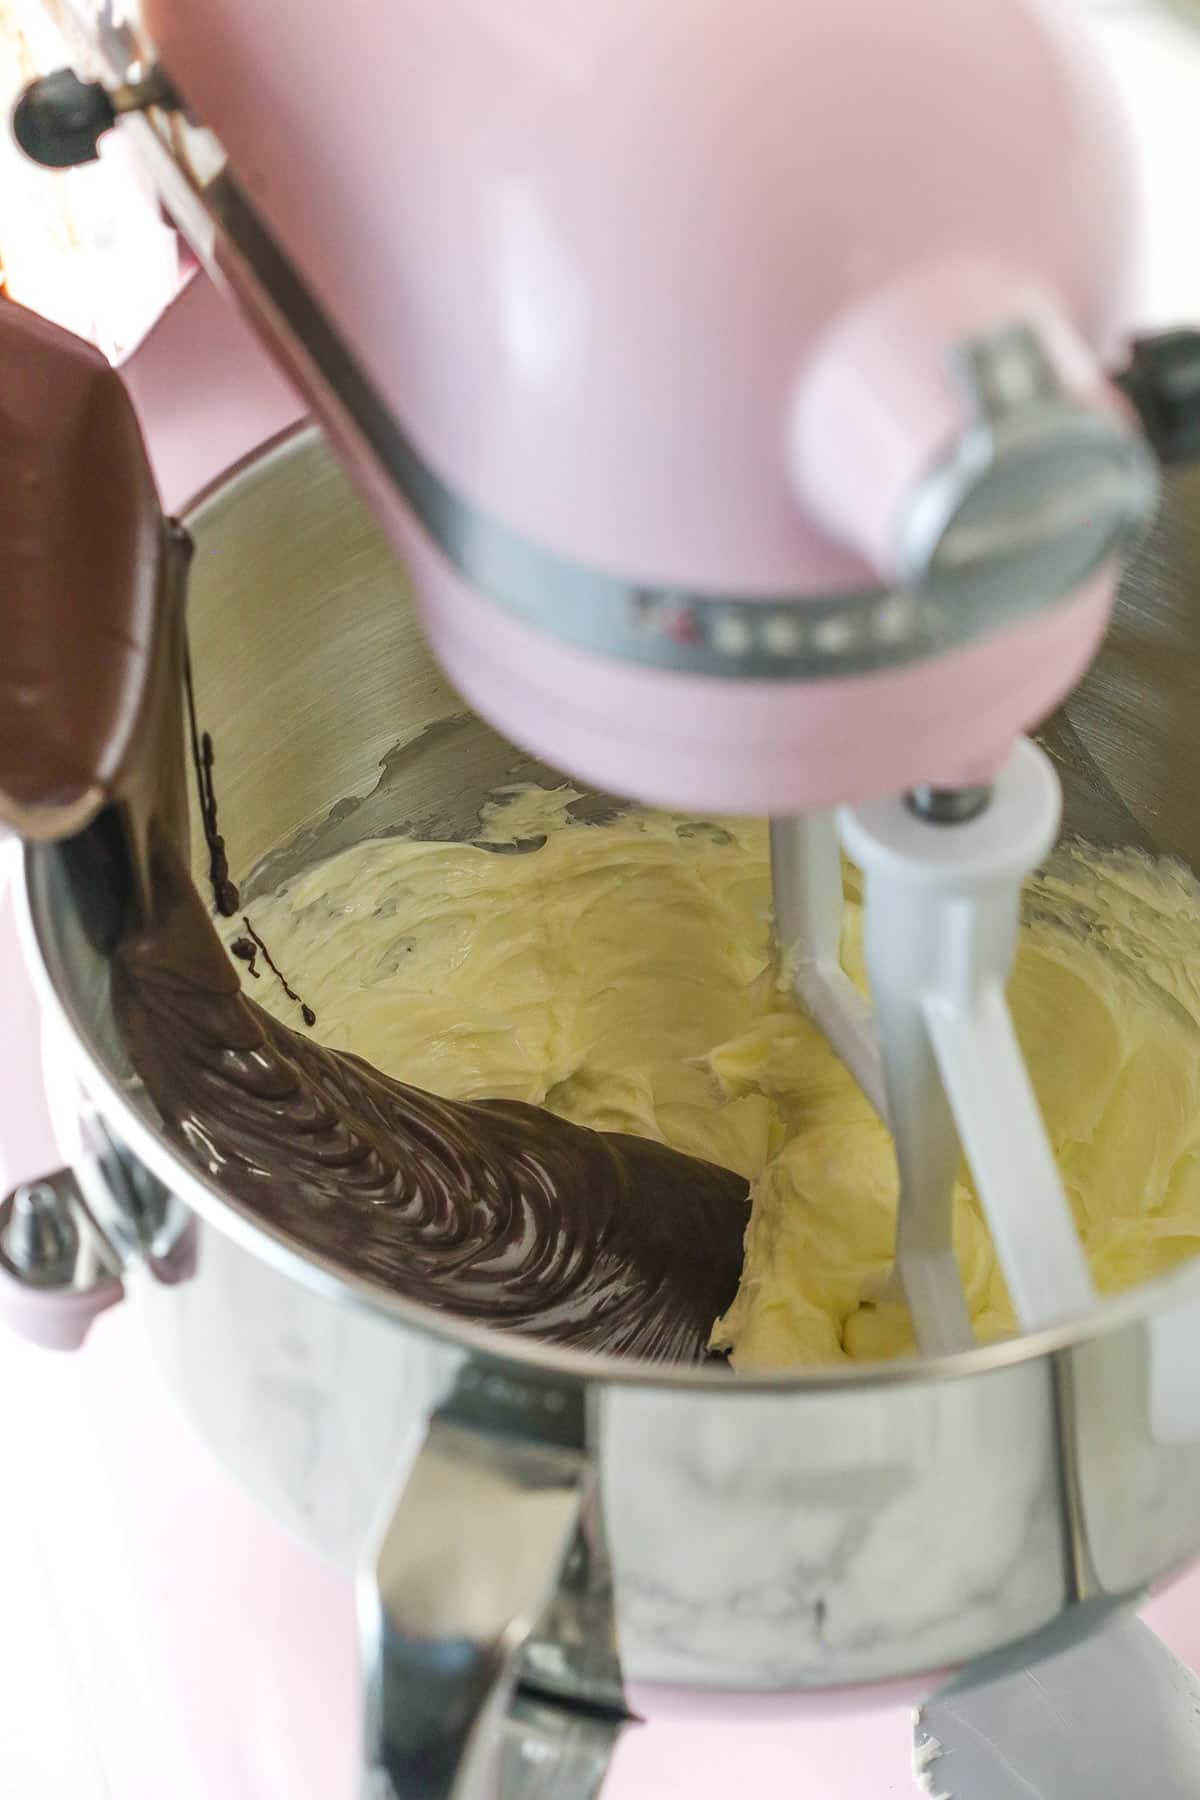 melted chocolate being added to butter for buttercream in mixing bowl on stand mixer